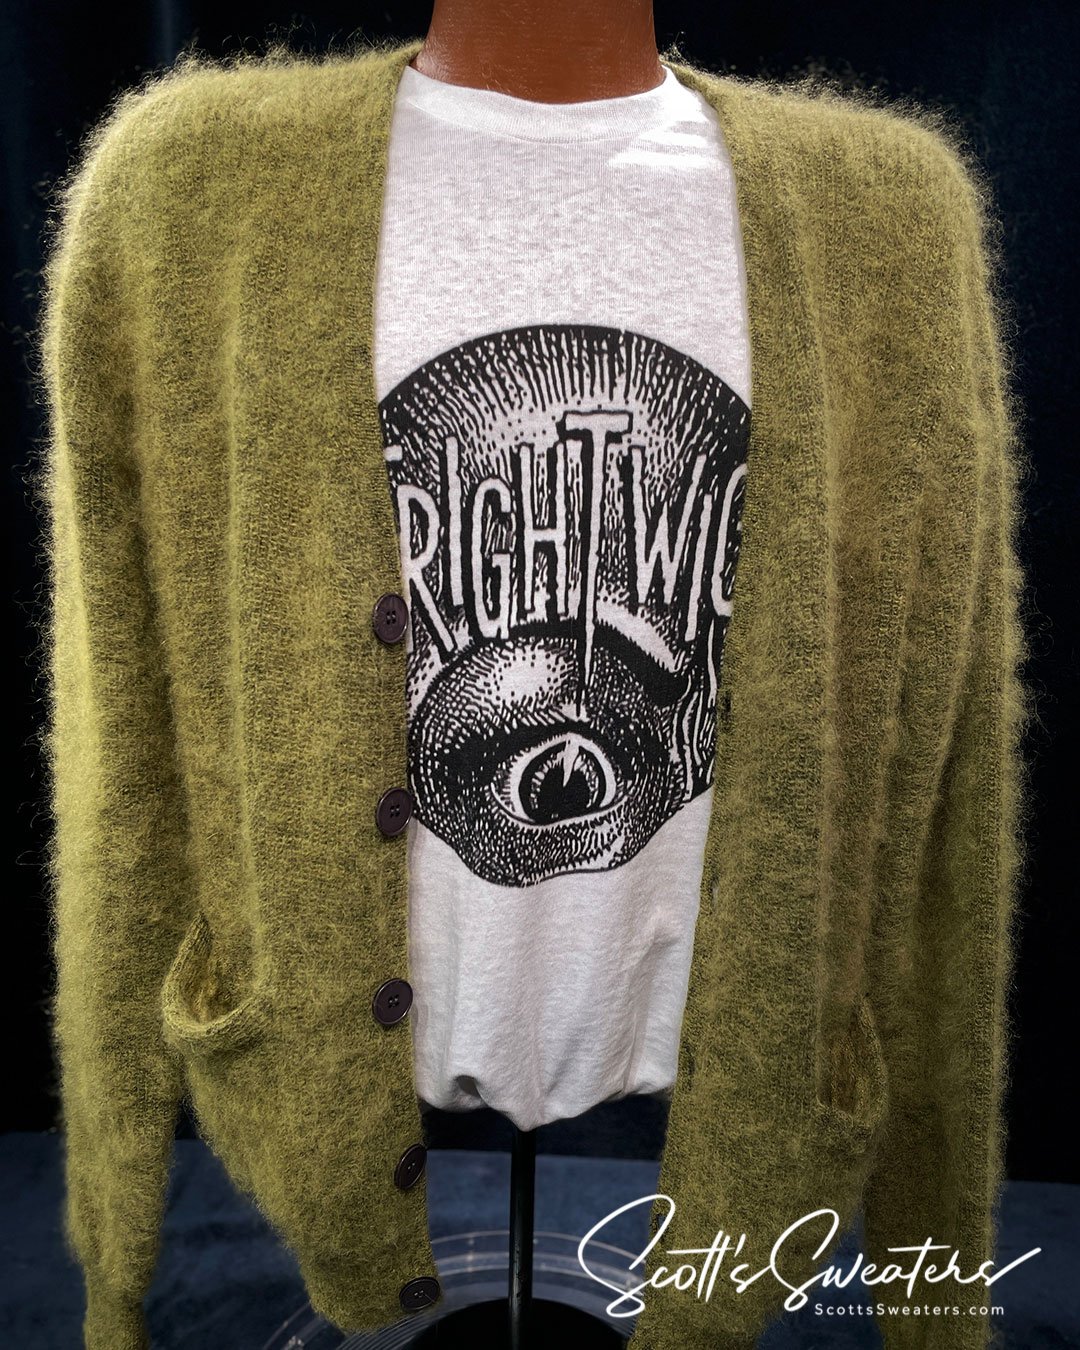 Scott's Sweaters on X: "My first factory remake of the mohair sweater Kurt  Cobain made famous. Let me know what you think. #sweater #kurtcobain  #cobainsweater #mohair #mohairsweater #retroclothing #cardigan  #fuzzysweater https://t.co/cIXR9ko3J5" /